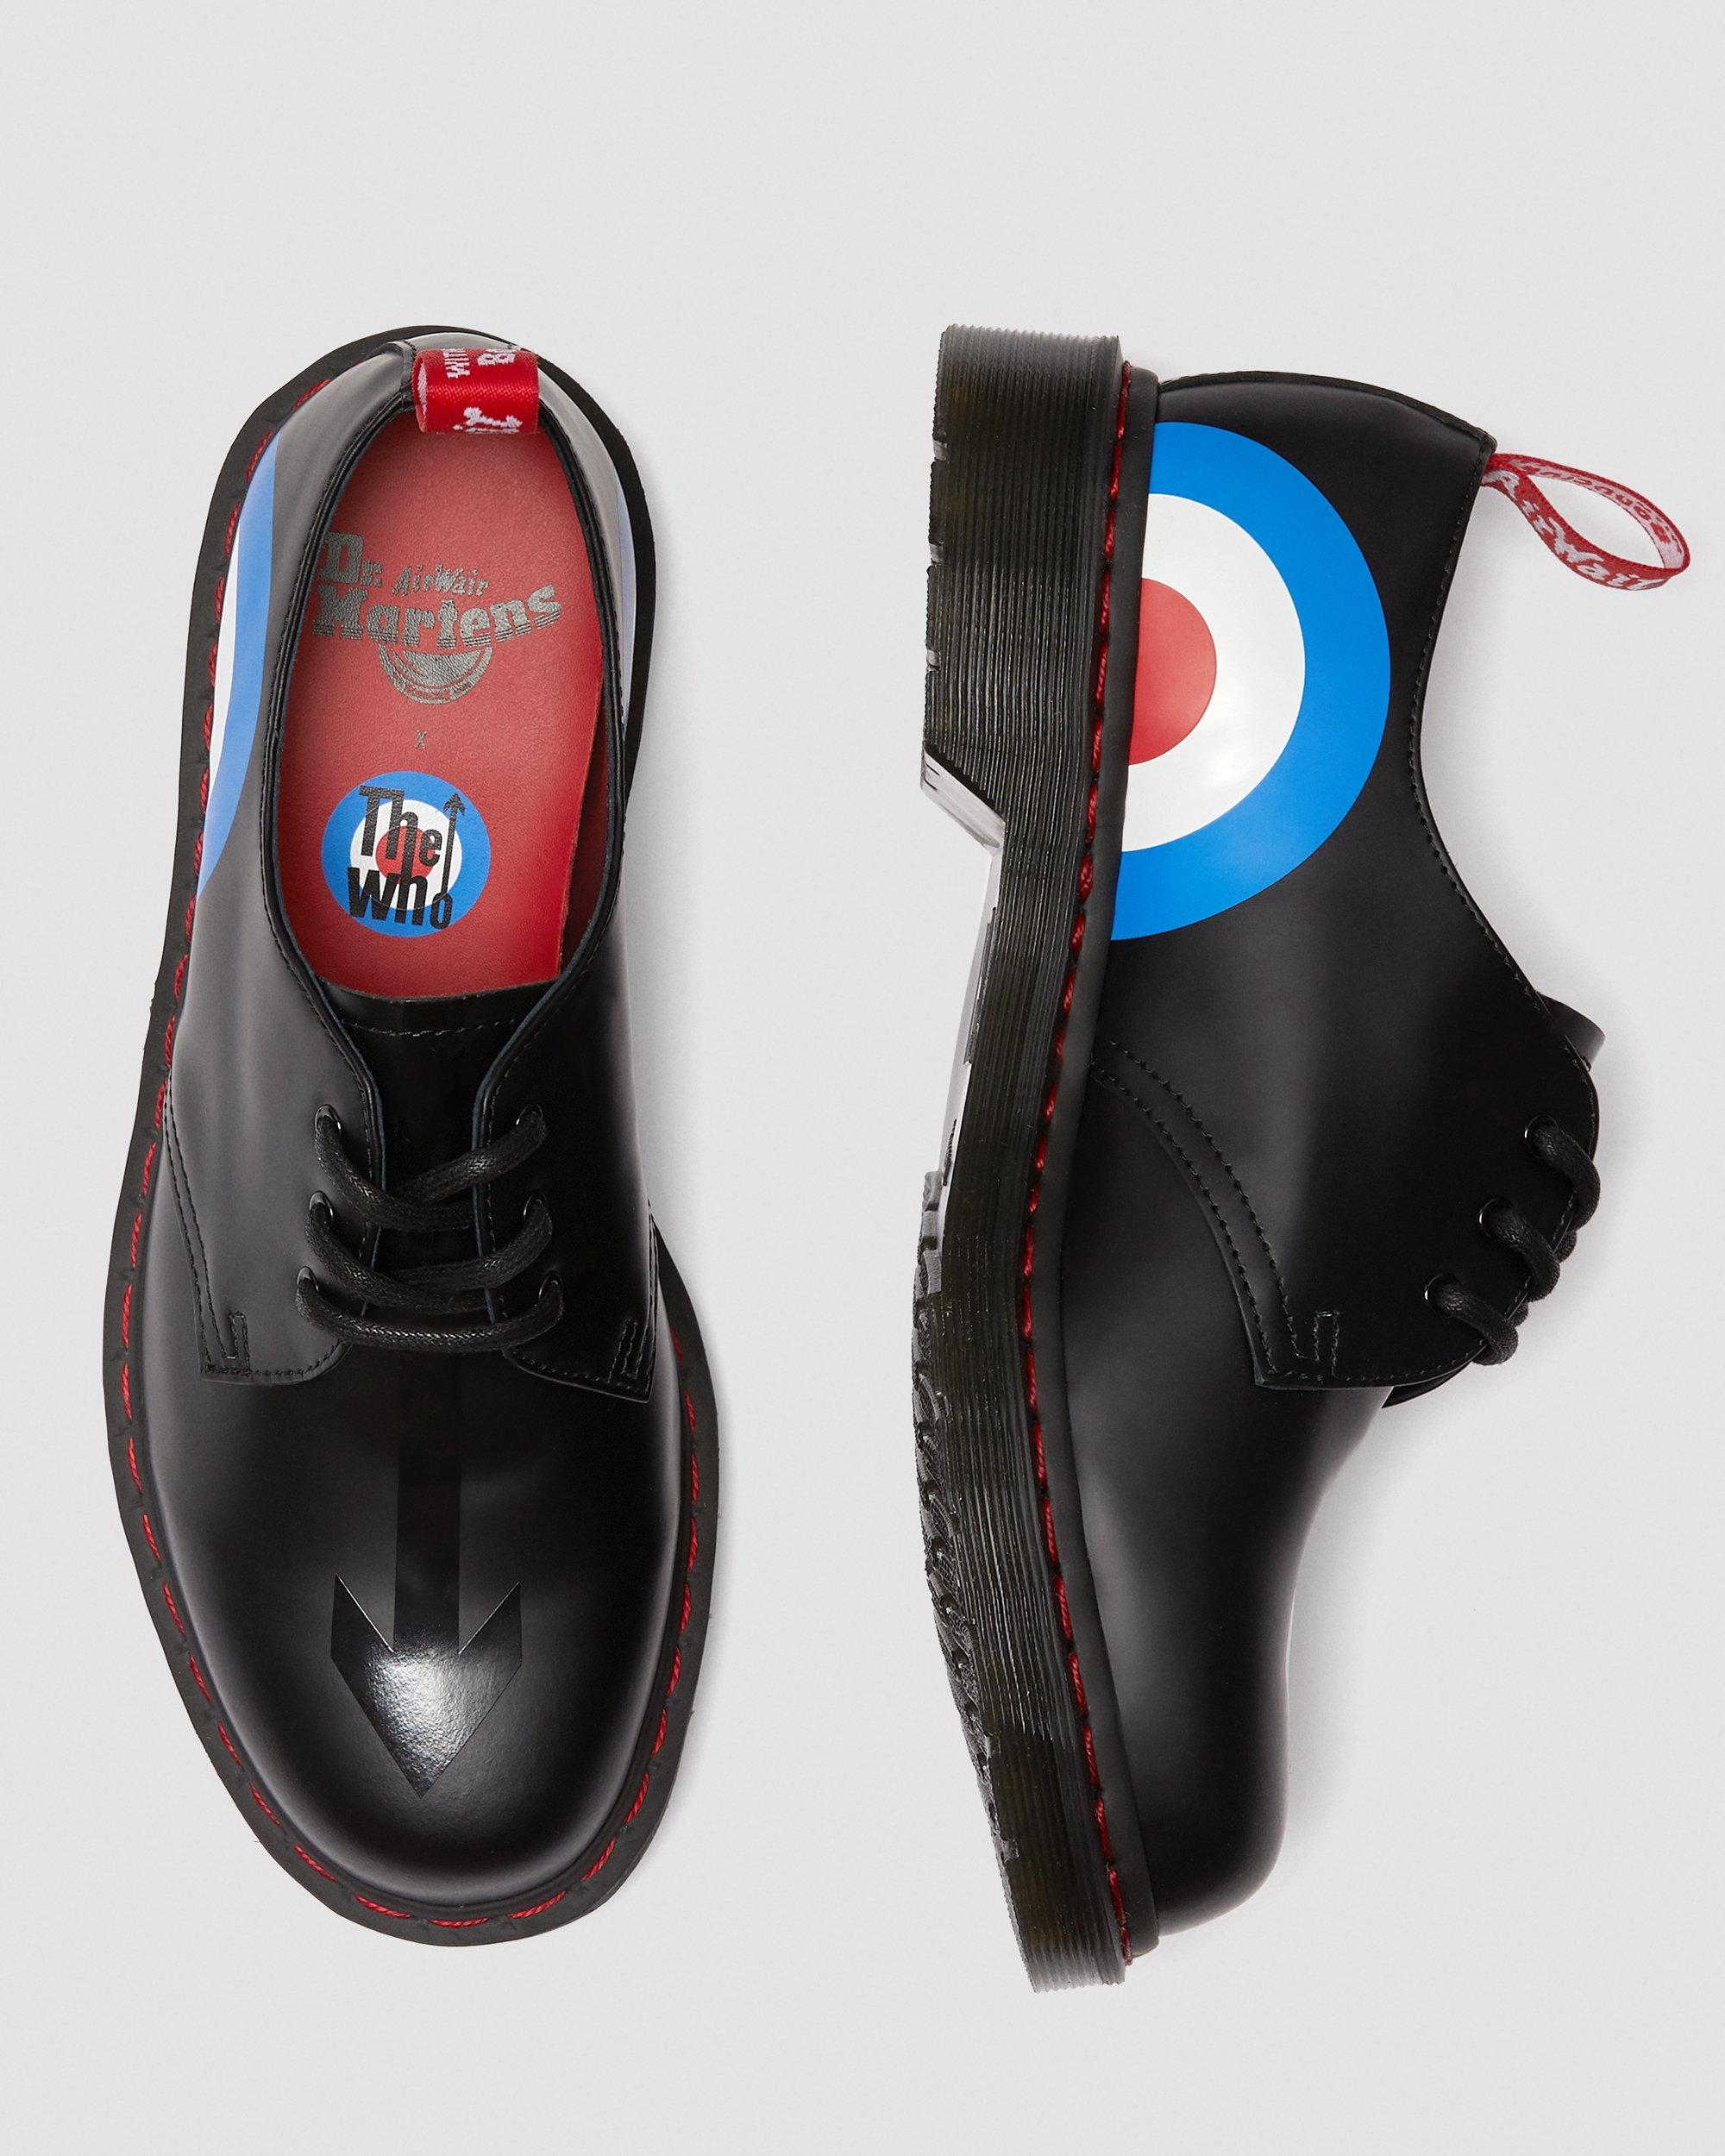 The Who 1461 Dr. Martens